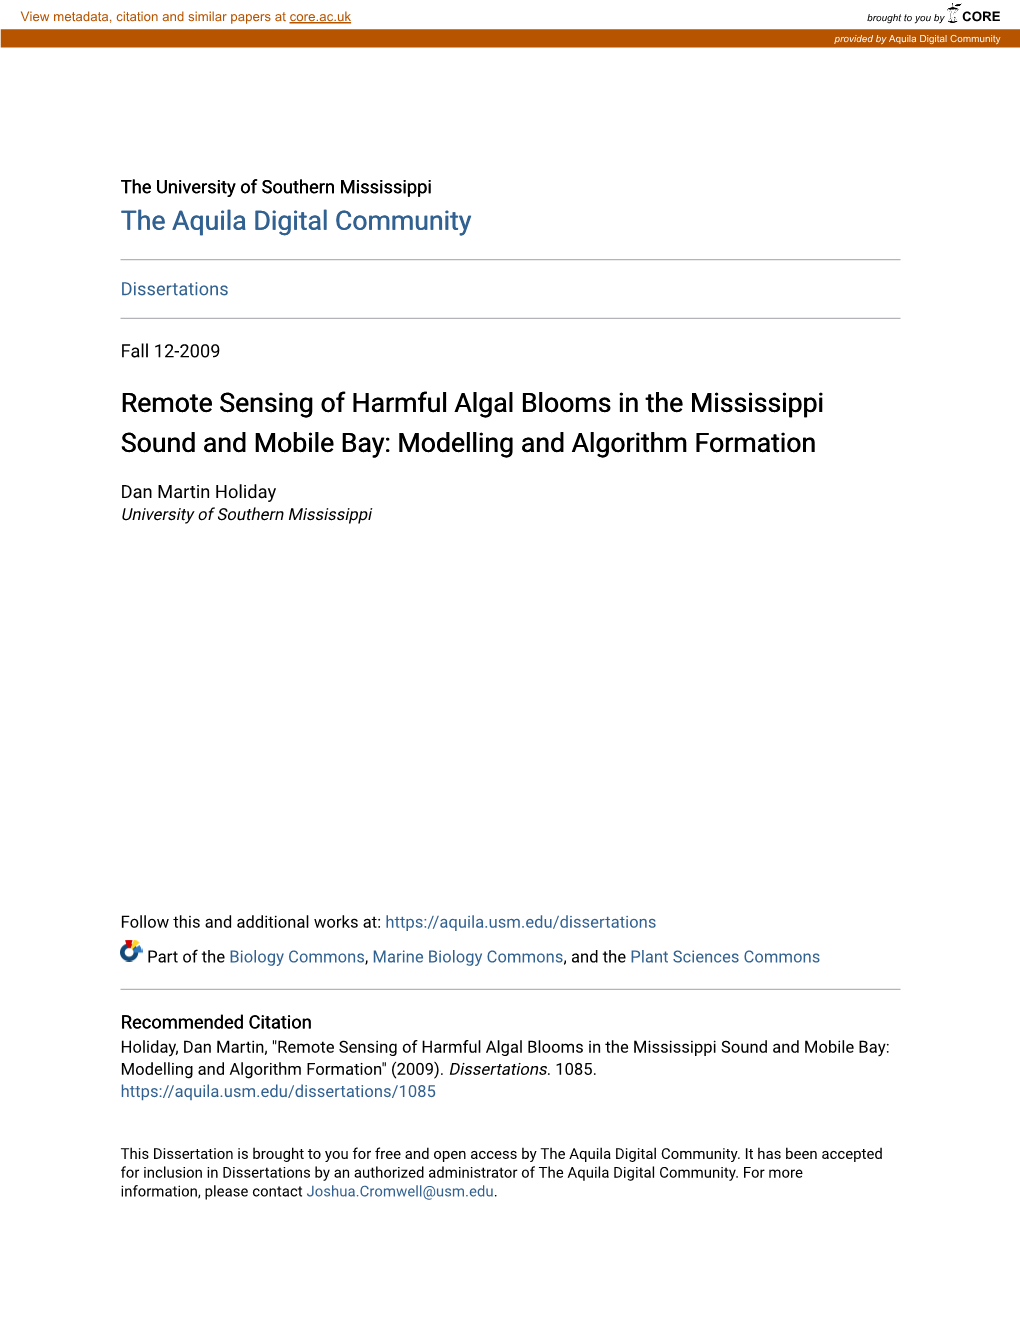 Remote Sensing of Harmful Algal Blooms in the Mississippi Sound and Mobile Bay: Modelling and Algorithm Formation